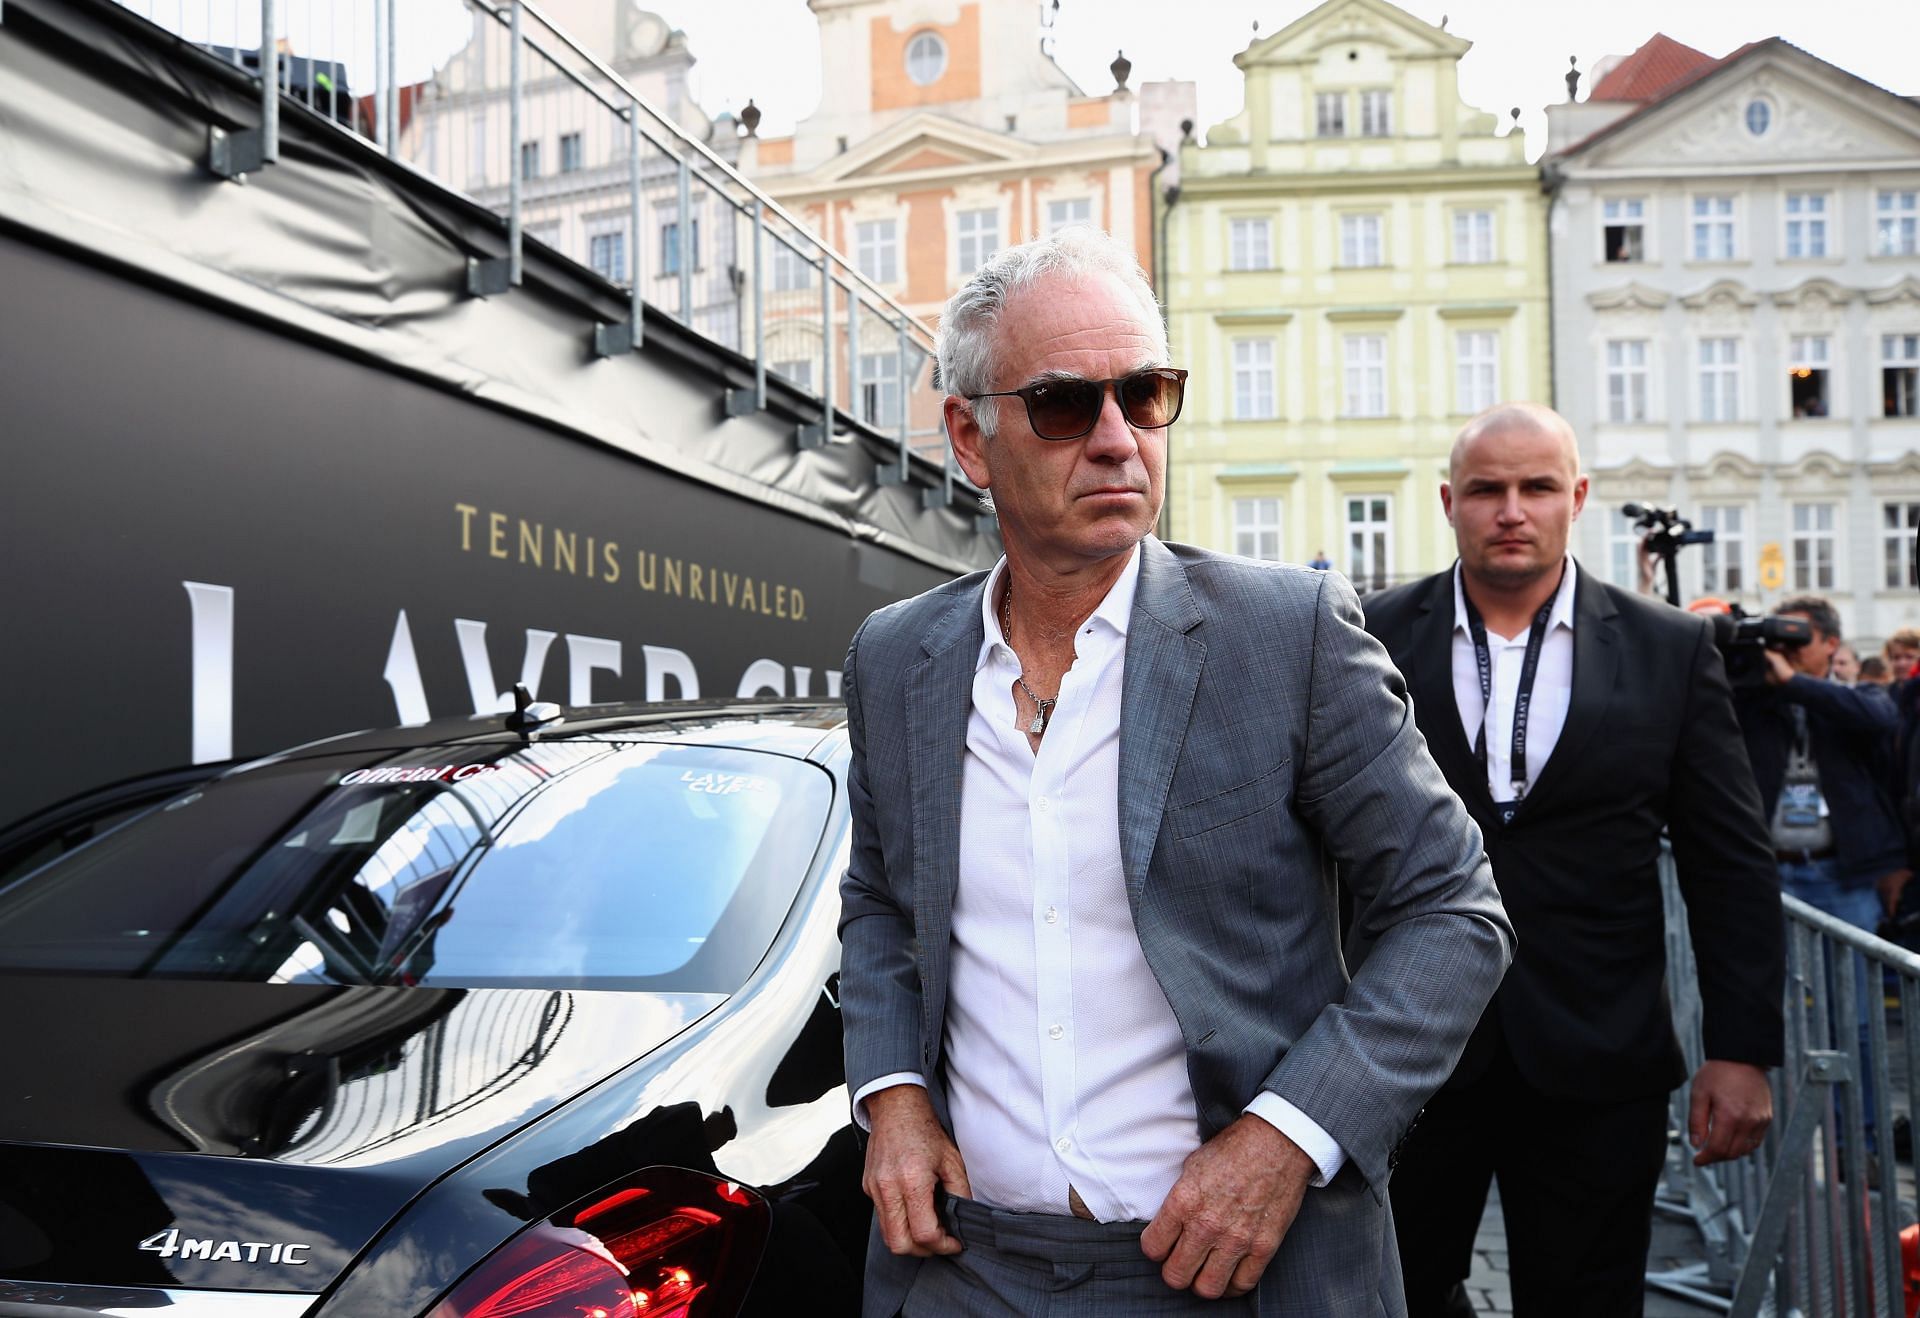 John McEnroe feels tennis will benefit from having players who are more passionate on the court